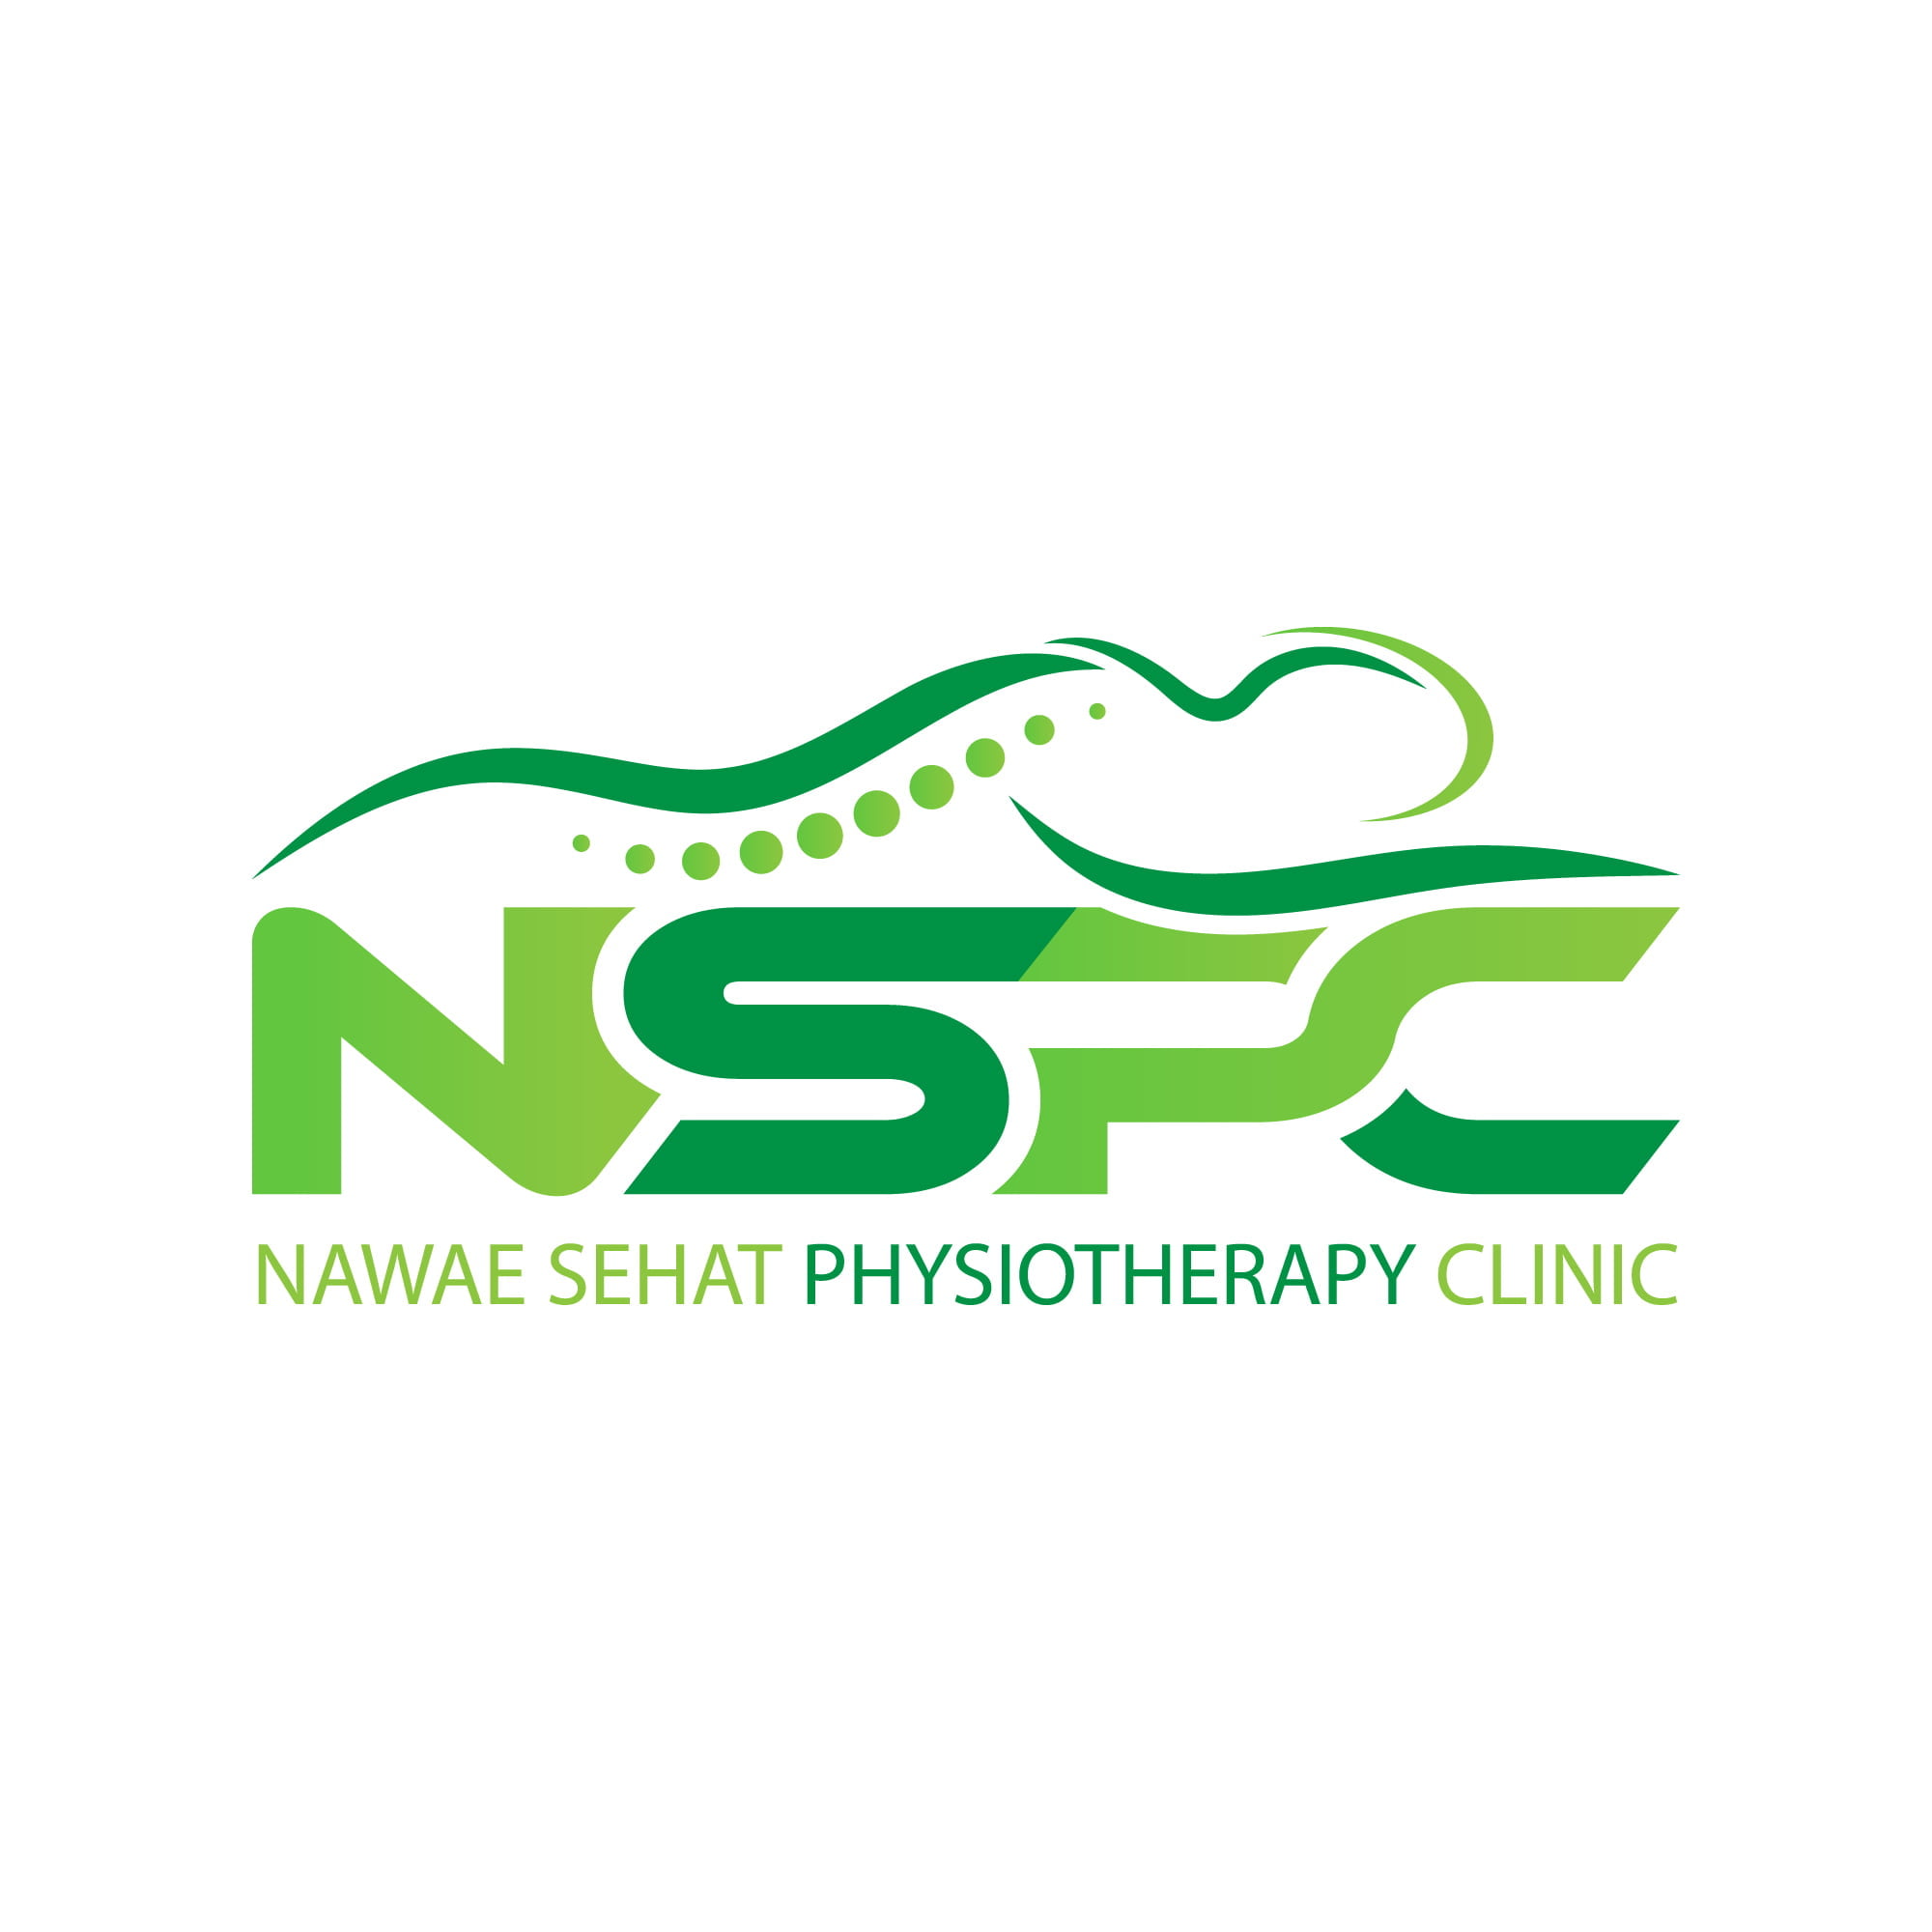 Physiotherapy and Massage Therapy Clinic In Whitby | PhysioRehab Group